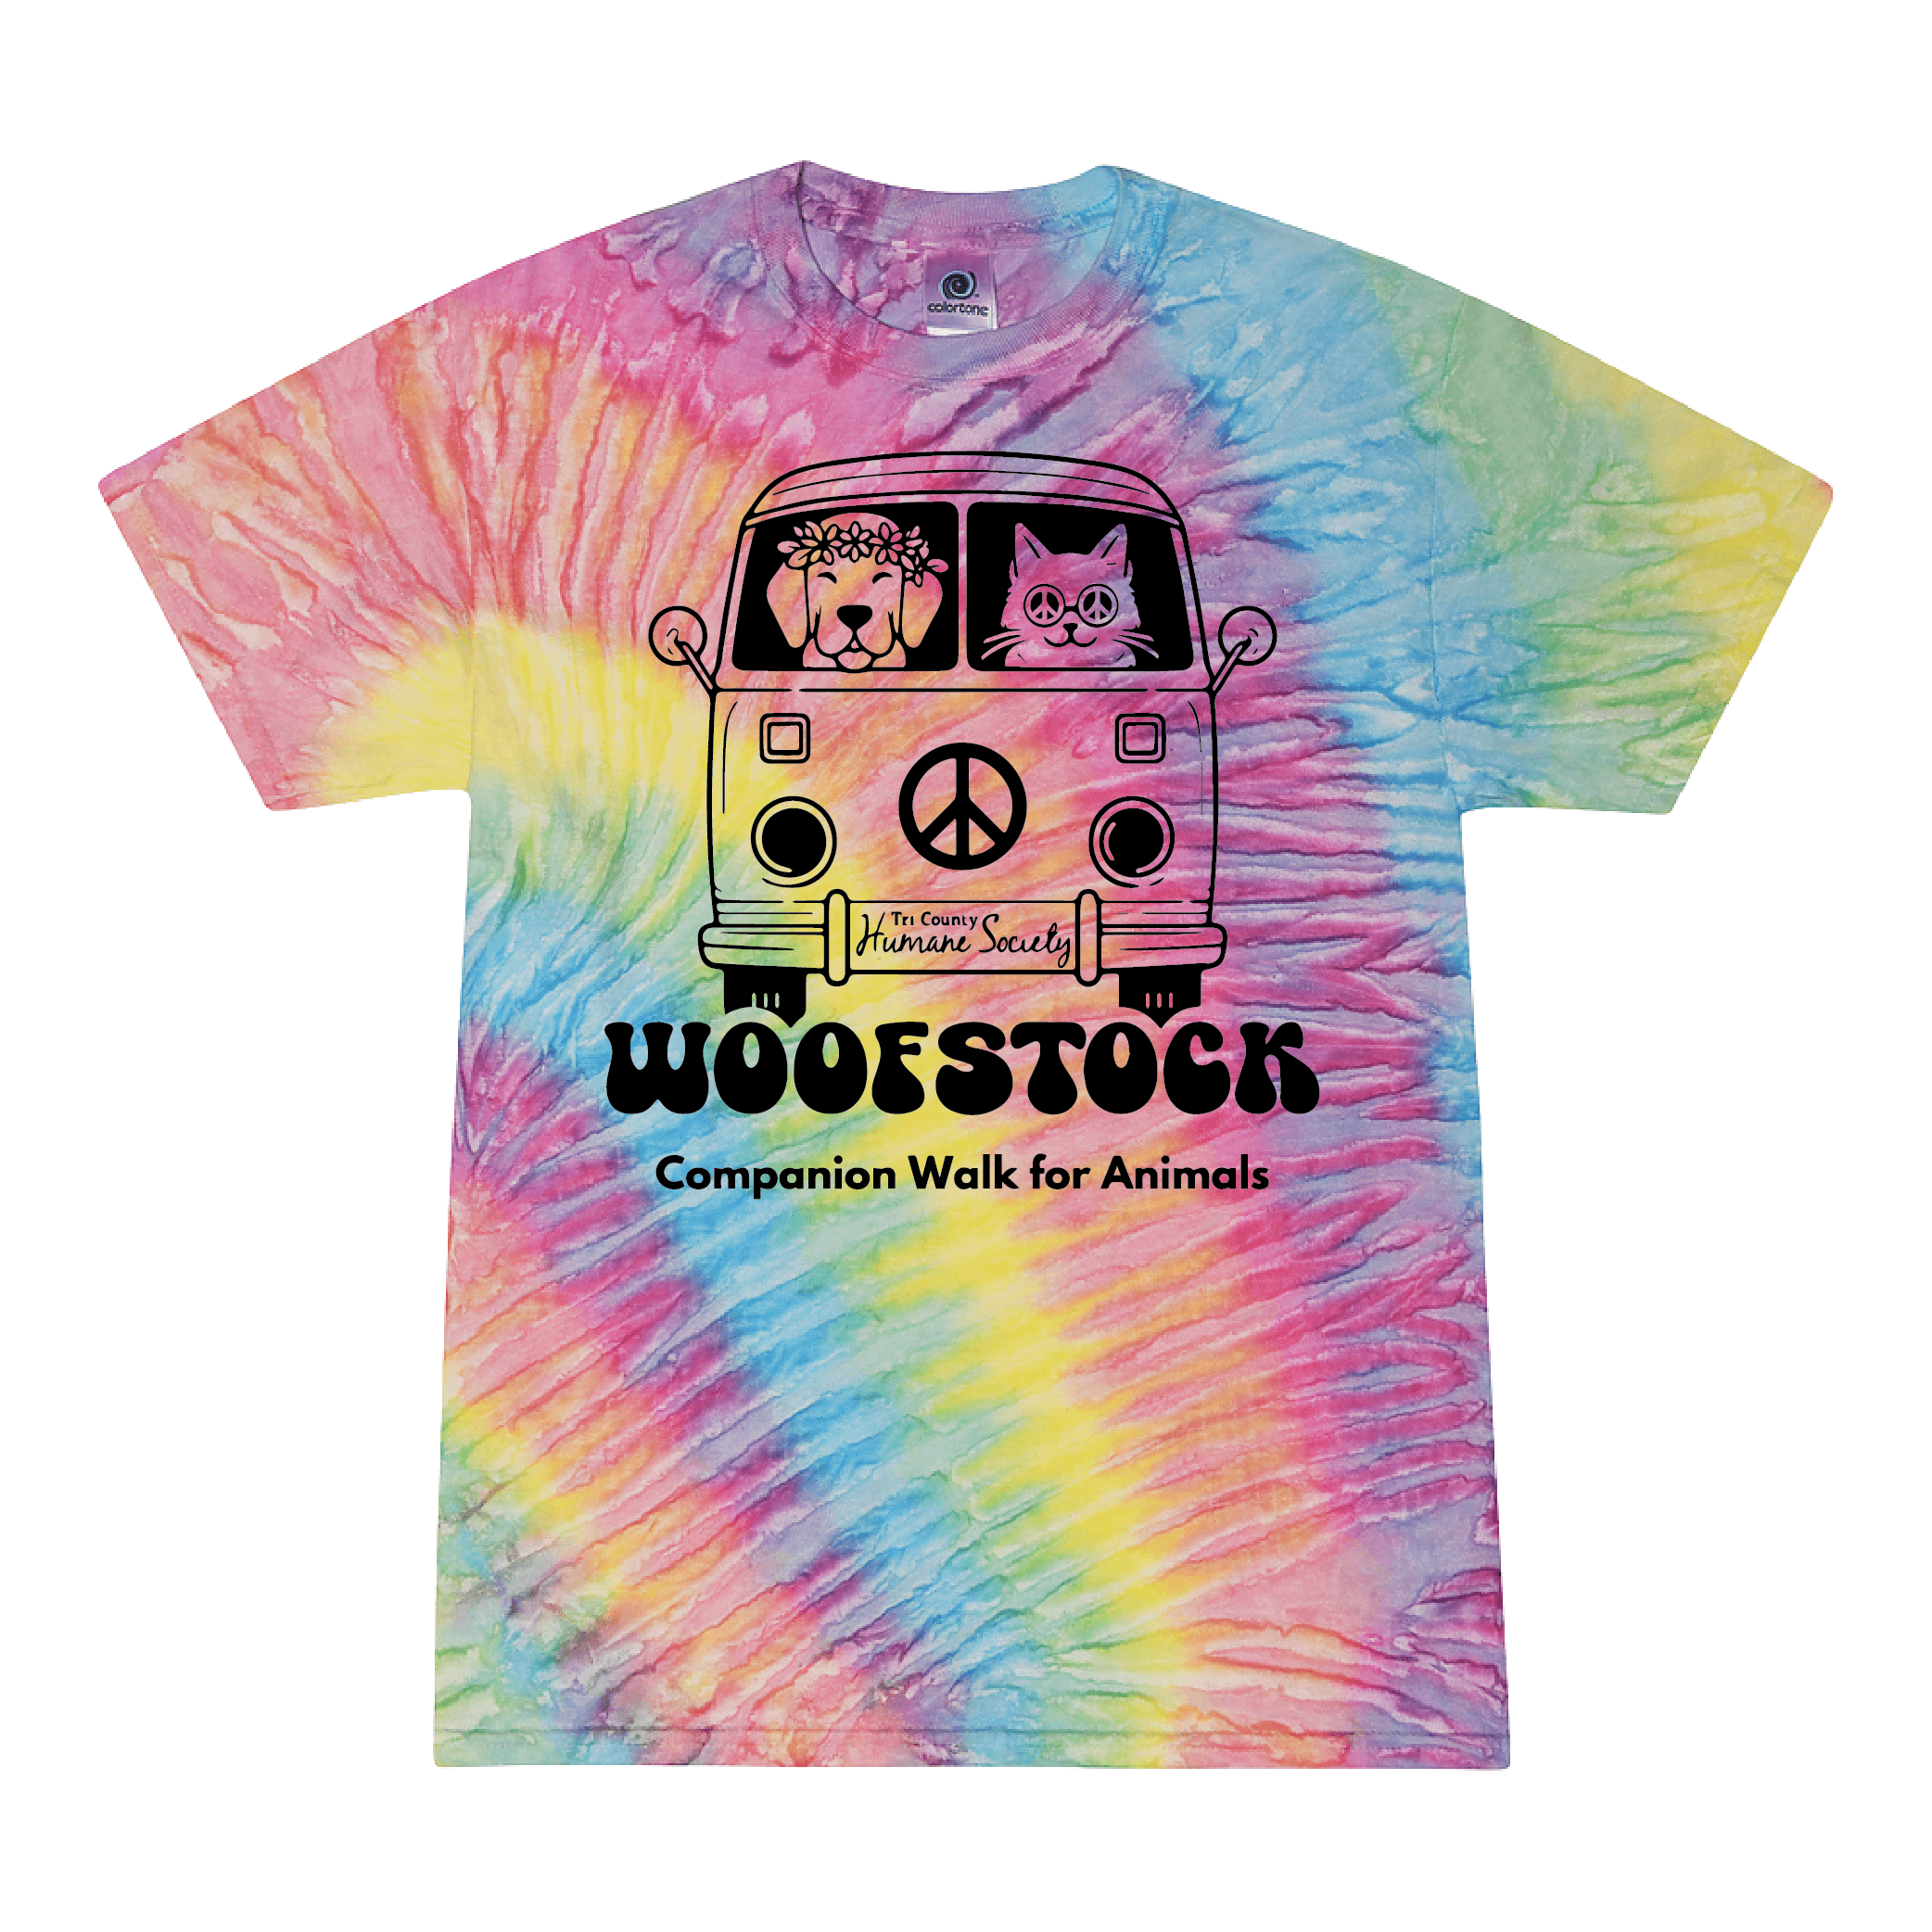 Register to Get Your Exclusive Woofstock T-shirt!